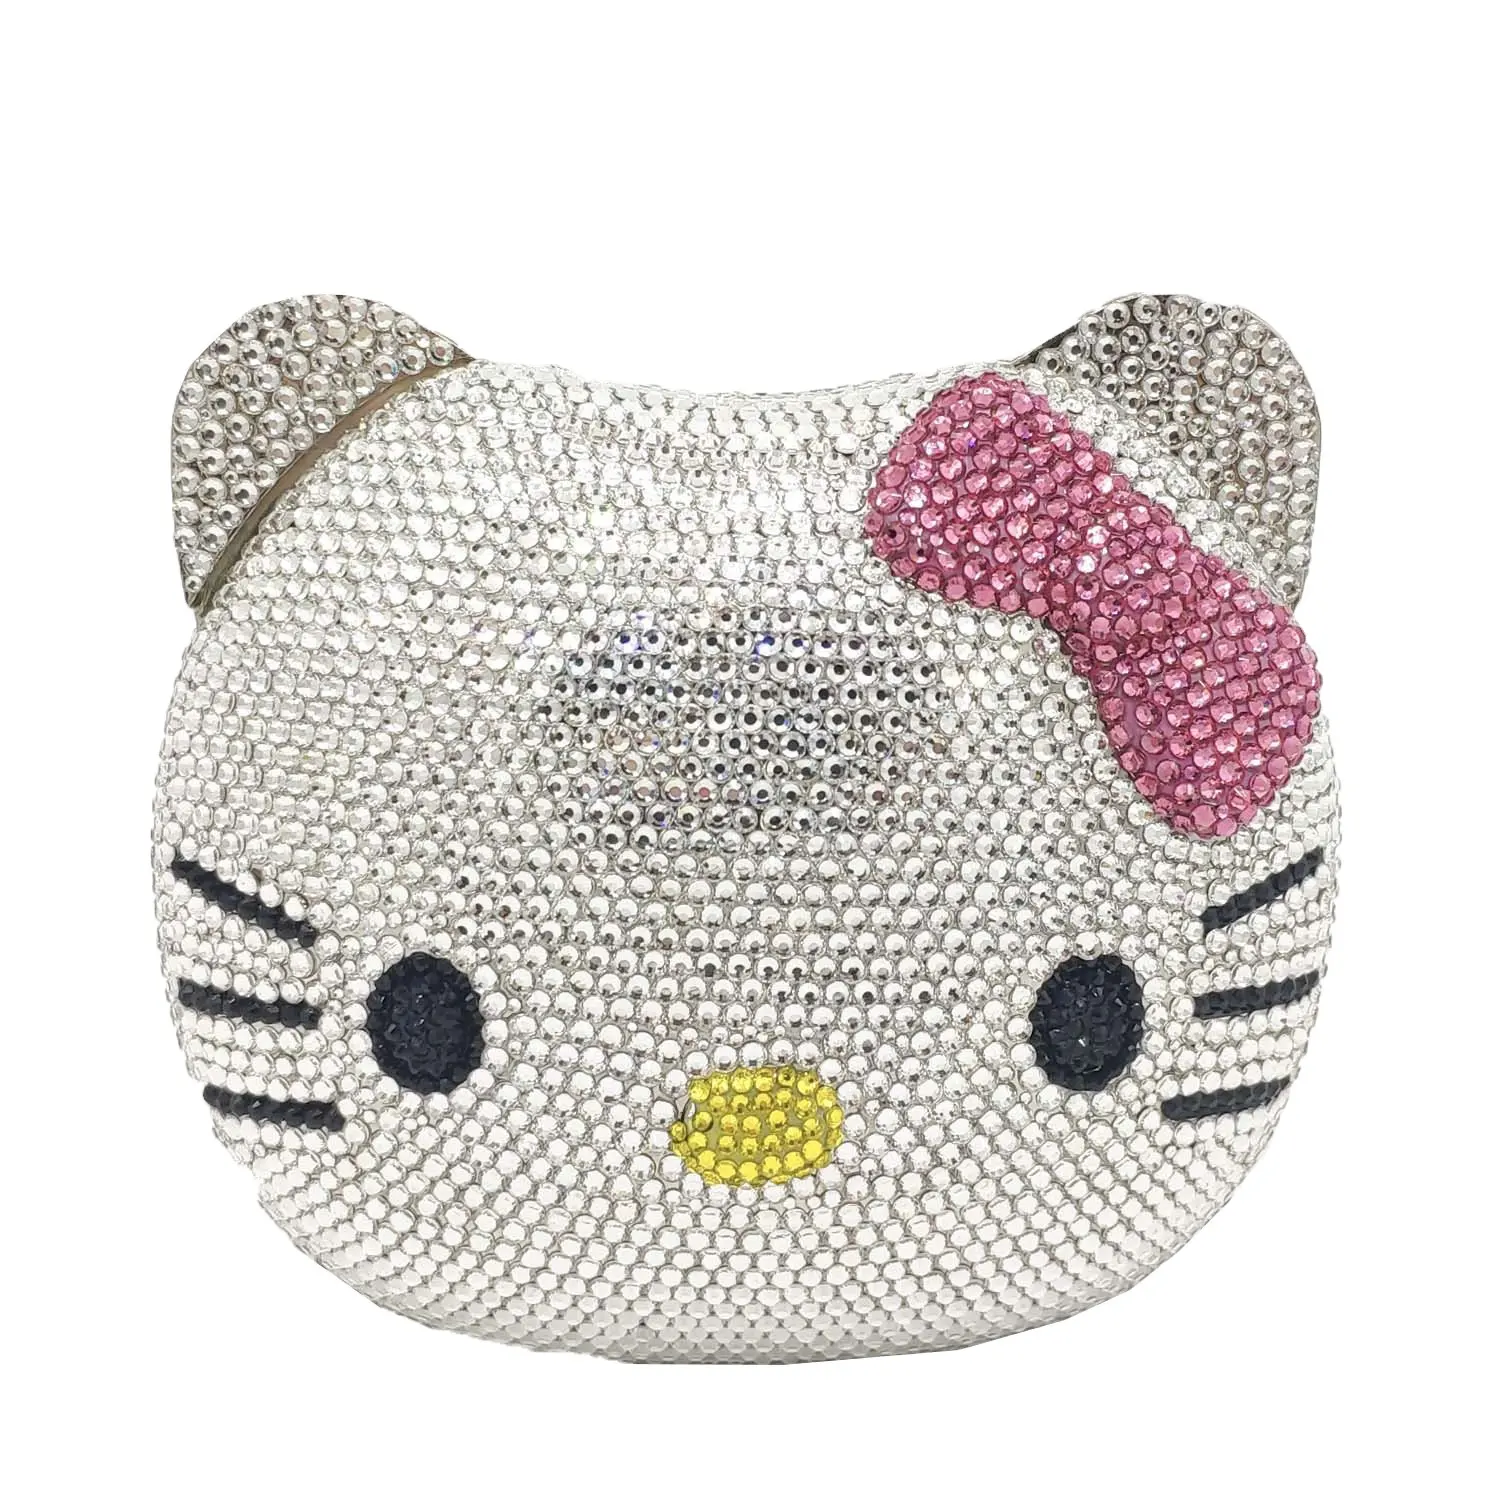 Evening Party Purse Factory Wholesales Luxury Fully Crystal Rhinestone Clutch Evening Bag For Formal Party 3d Cat Purse